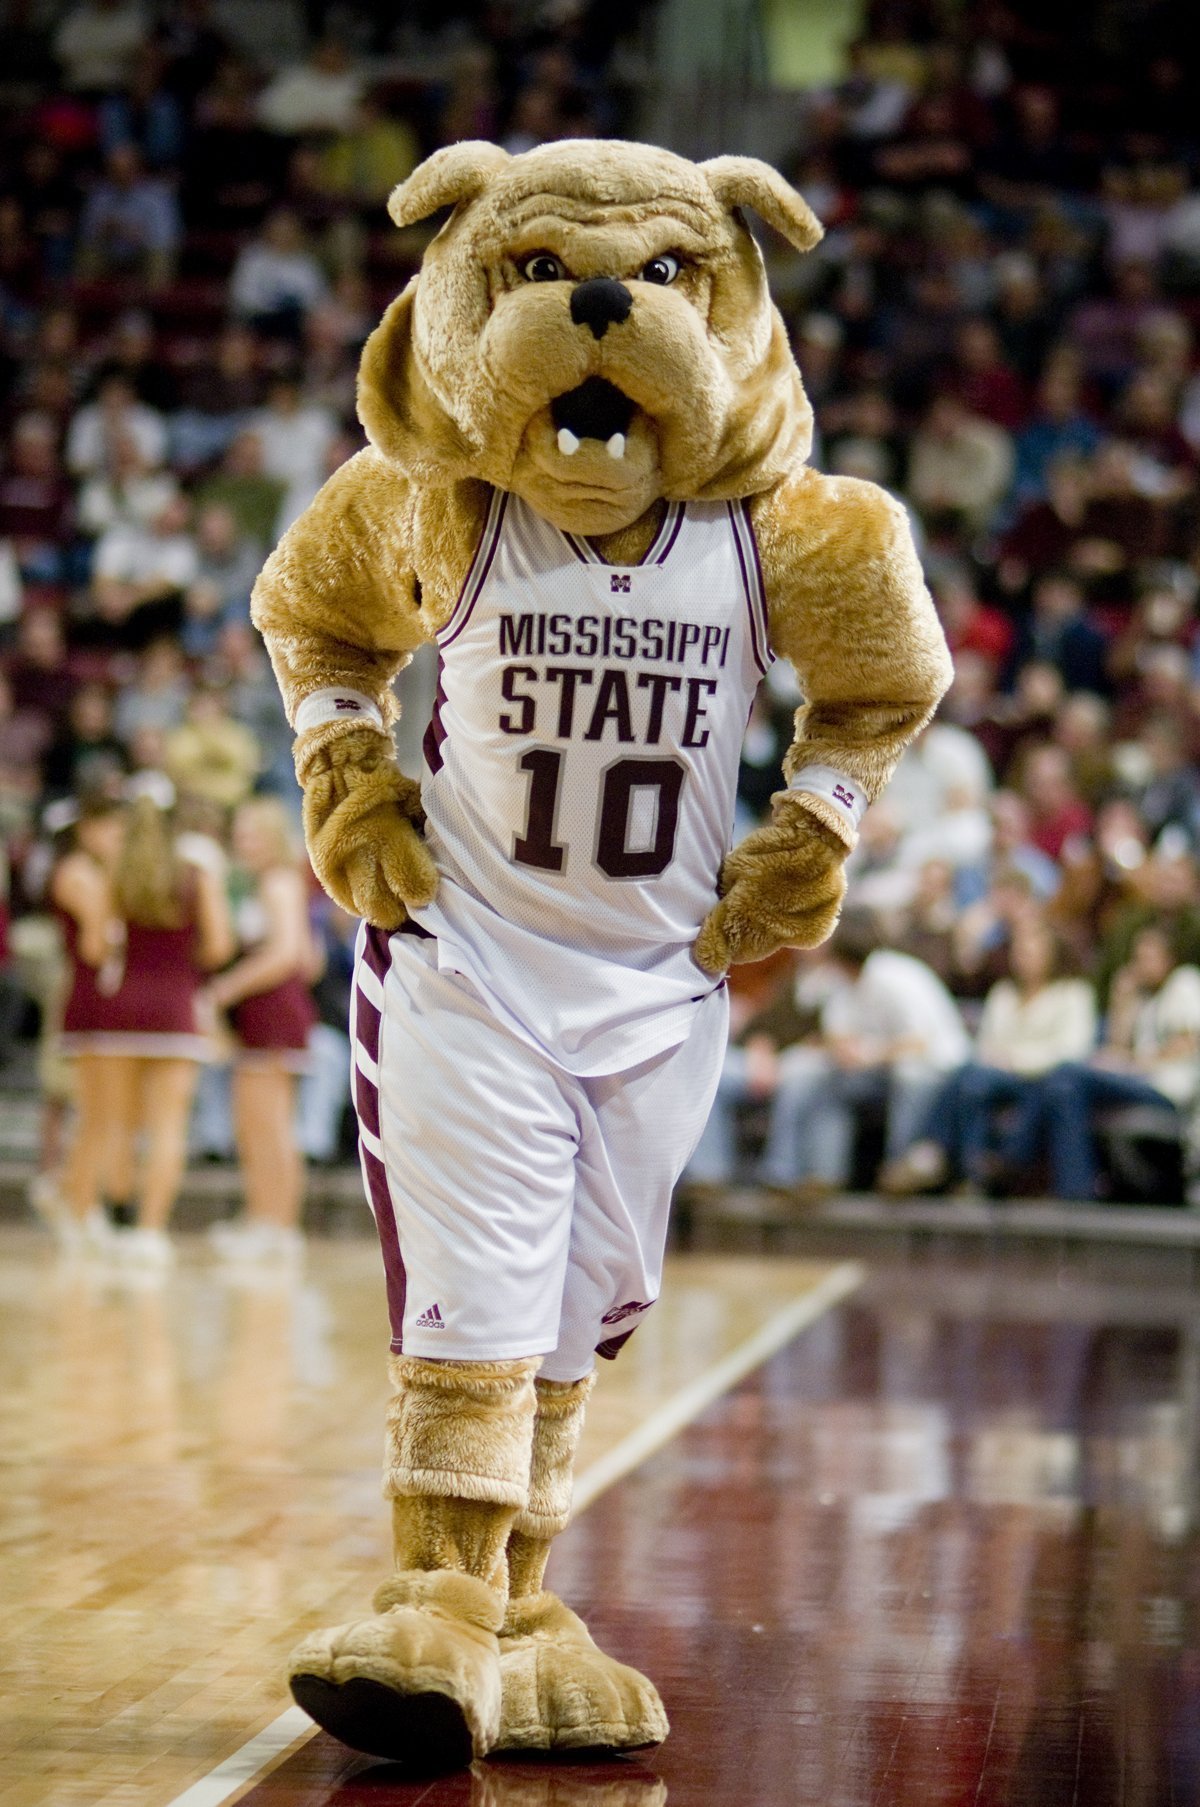 Mississippi State&#039;s Bully mascot settles wrongful injury case with ESPN